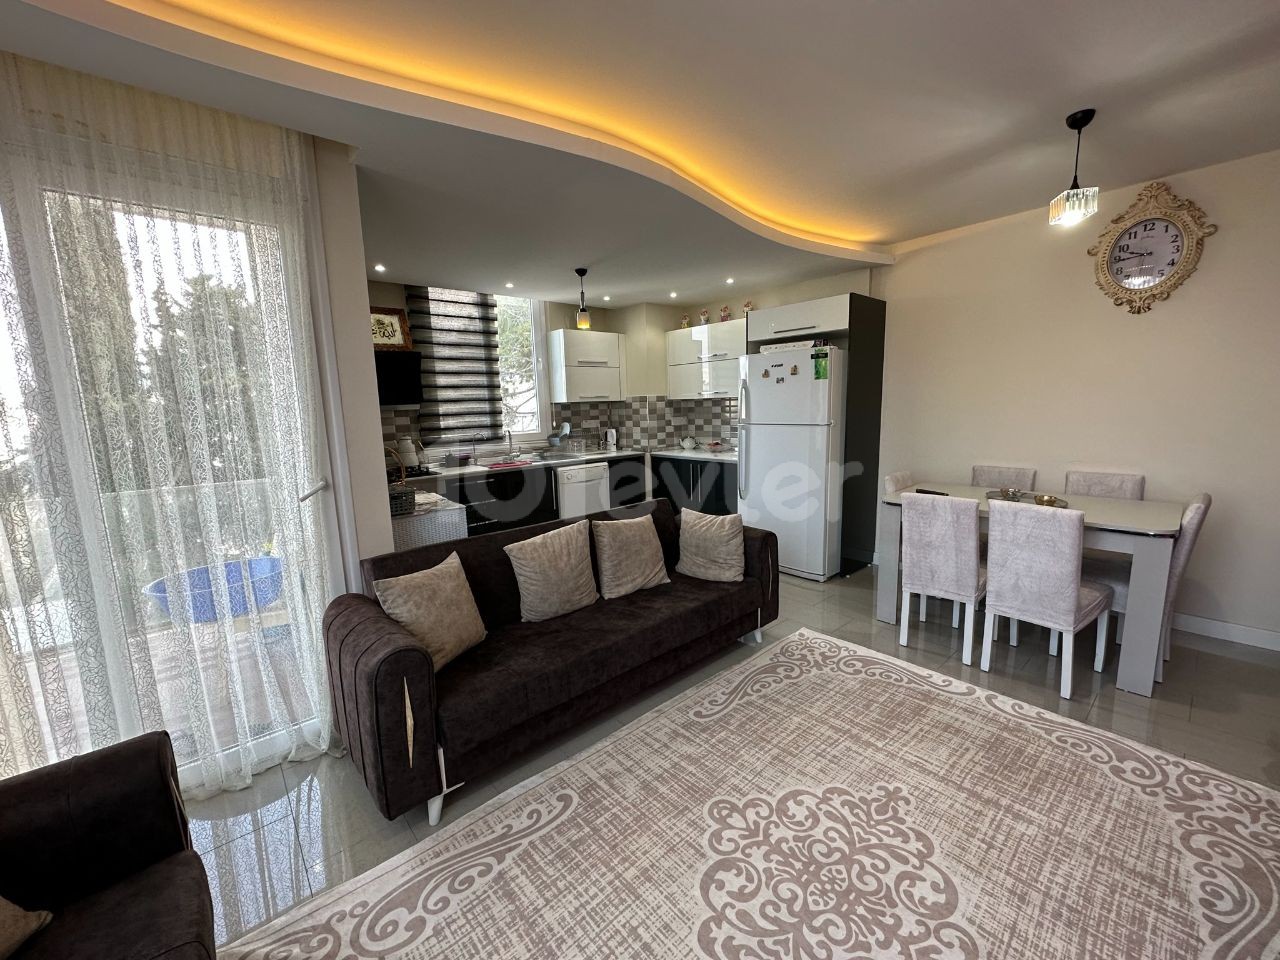 THE MOST SUITE 2+1 FULLY FURNISHED APARTMENT FOR SALE IN THE CENTER OF CYPRUS GİRNE